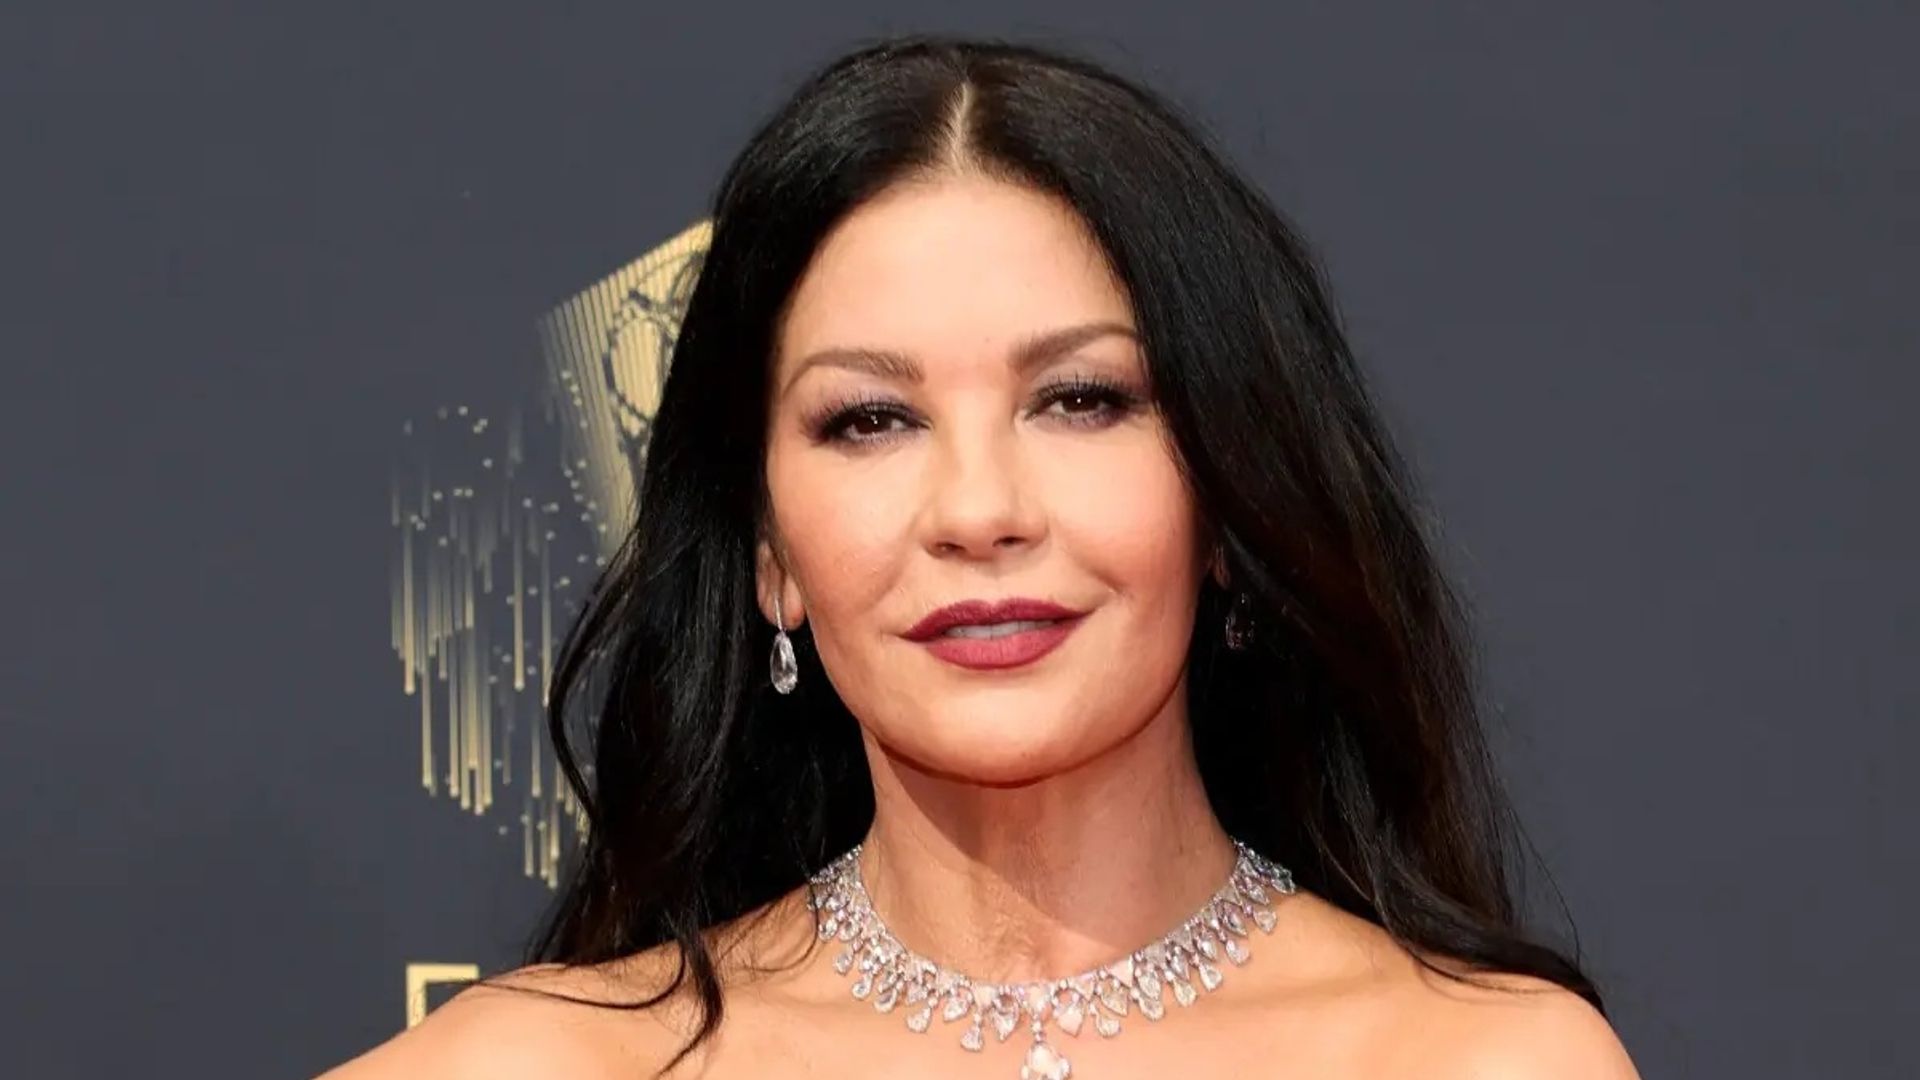 Catherine Zeta-Jones' Super Bowl appearance proves she hasn't aged a day - see unexpected photos - HELLO!